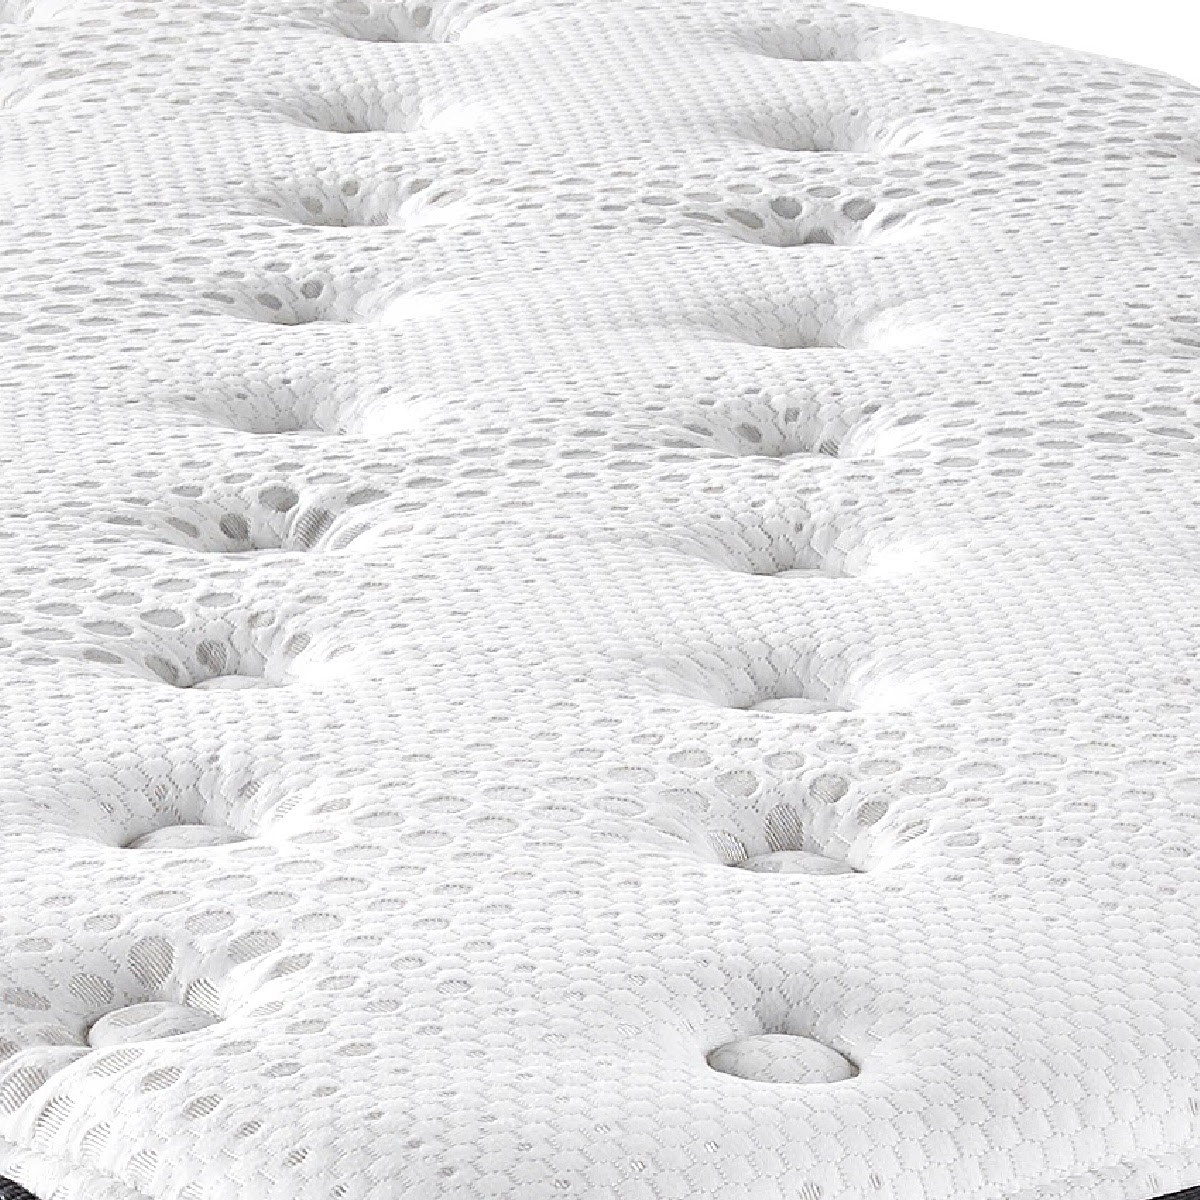 Lull 12" Hybrid Mattress close up of top. White circle stich quilting with small grey circular texture. 